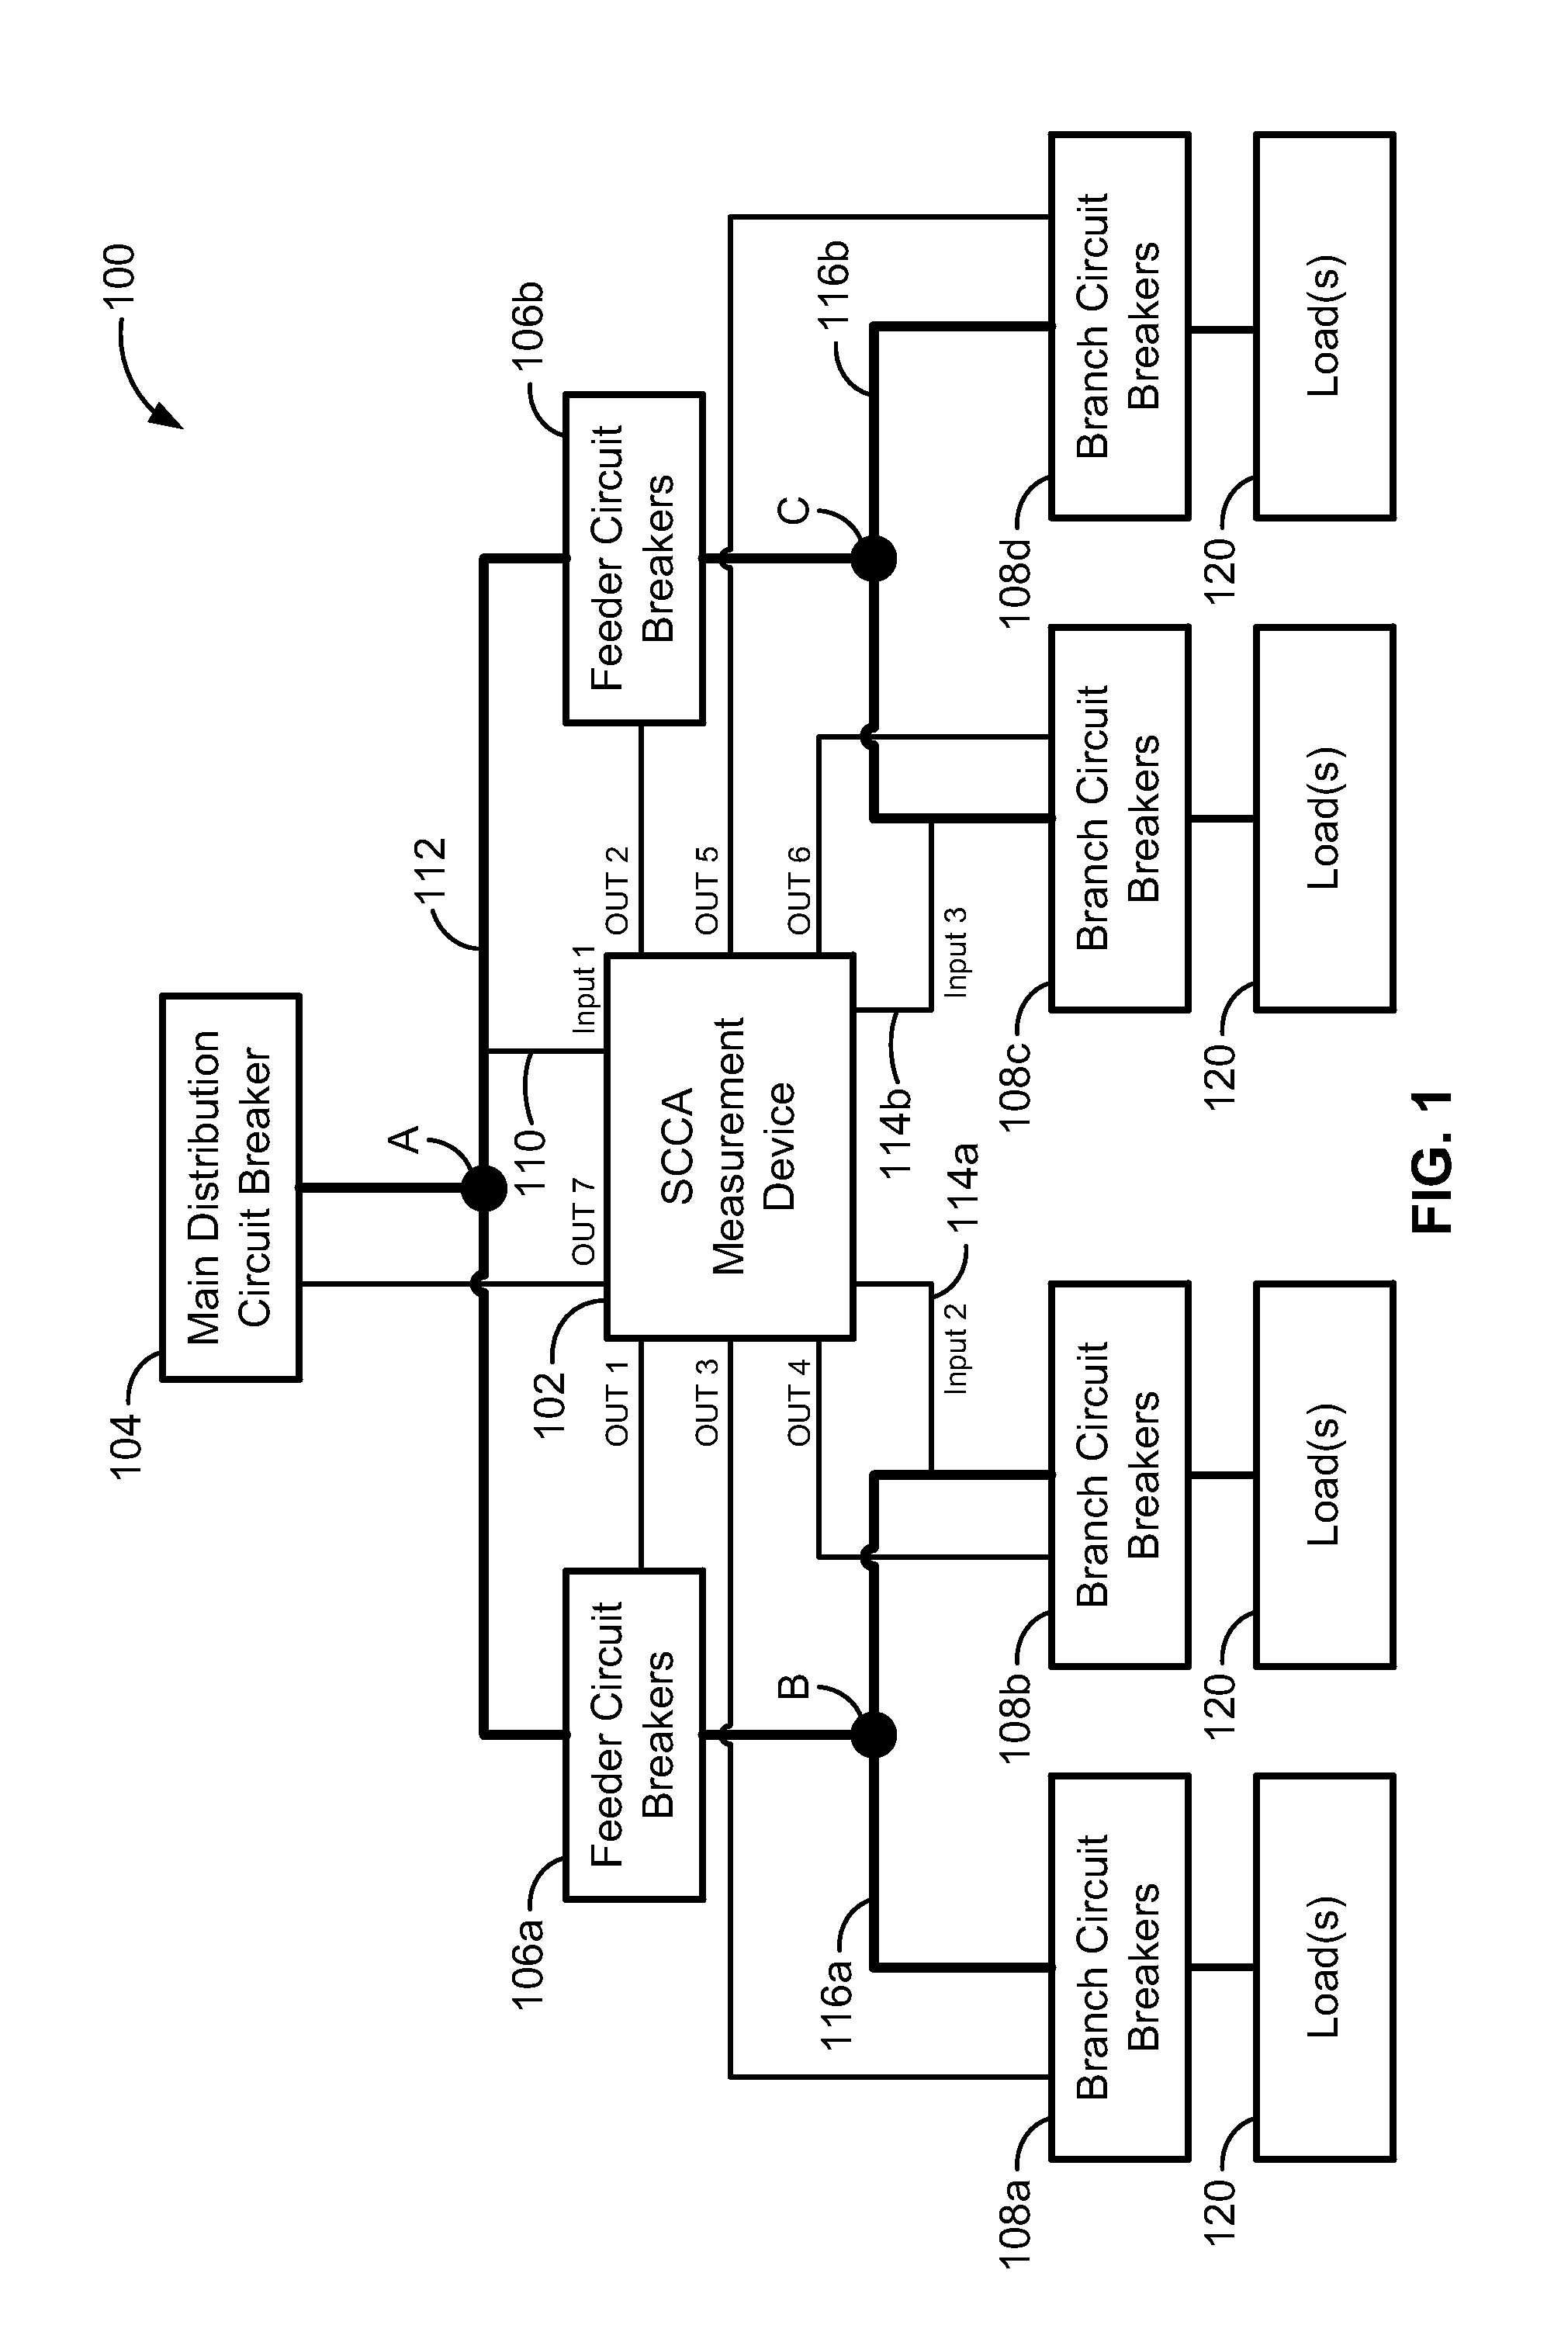 Optimized protection coordination of electronic-trip circuit breaker by short circuit current availability monitoring